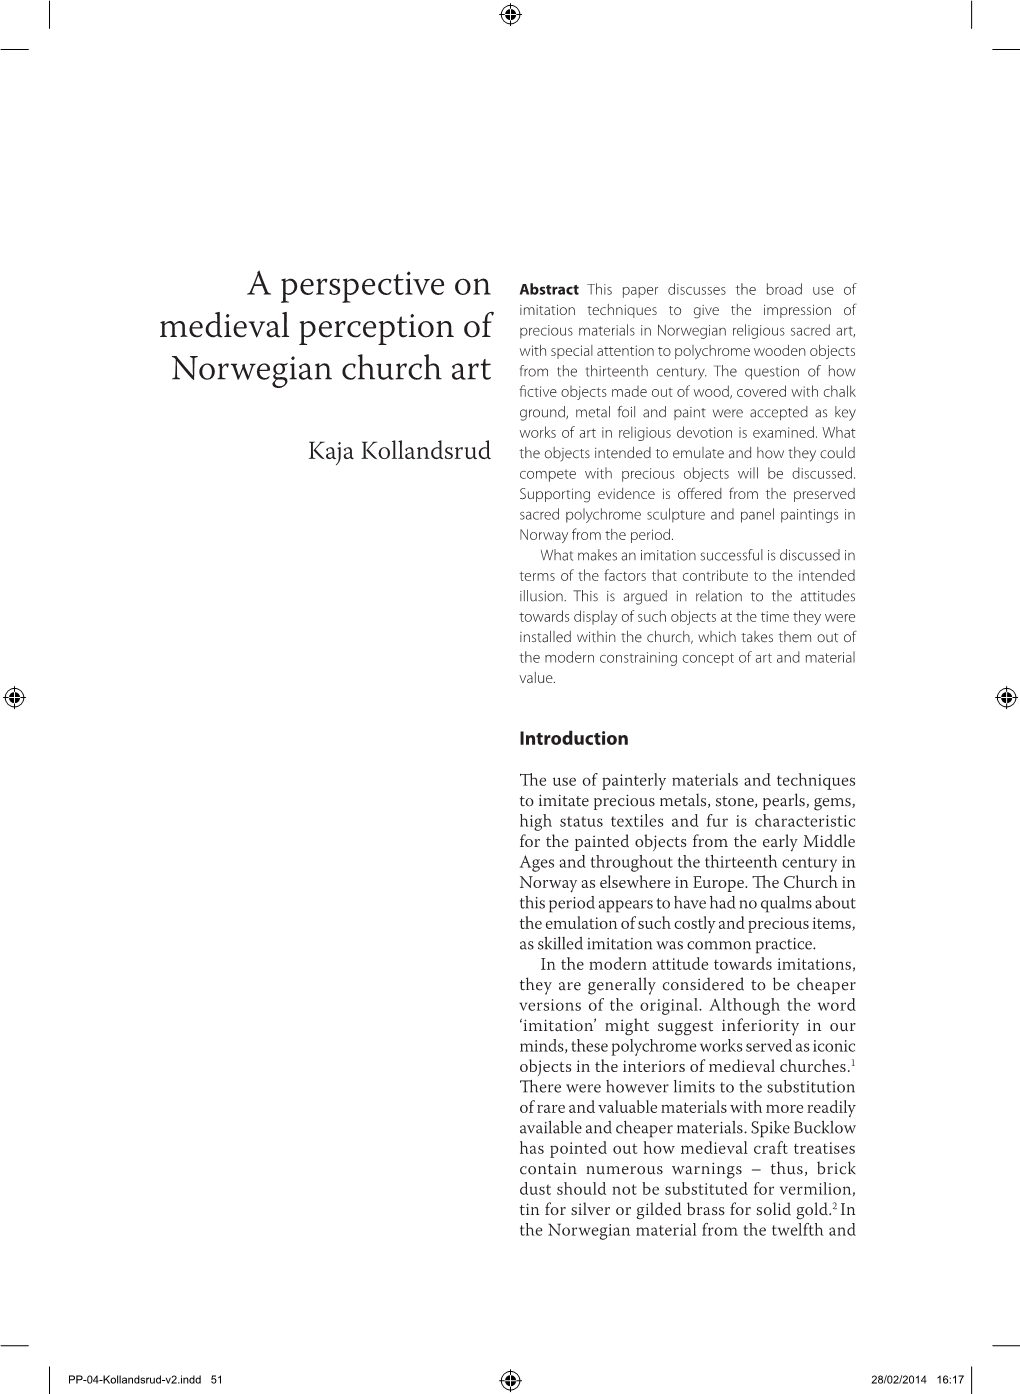 A Perspective on Medieval Perception of Norwegian Church Art 53